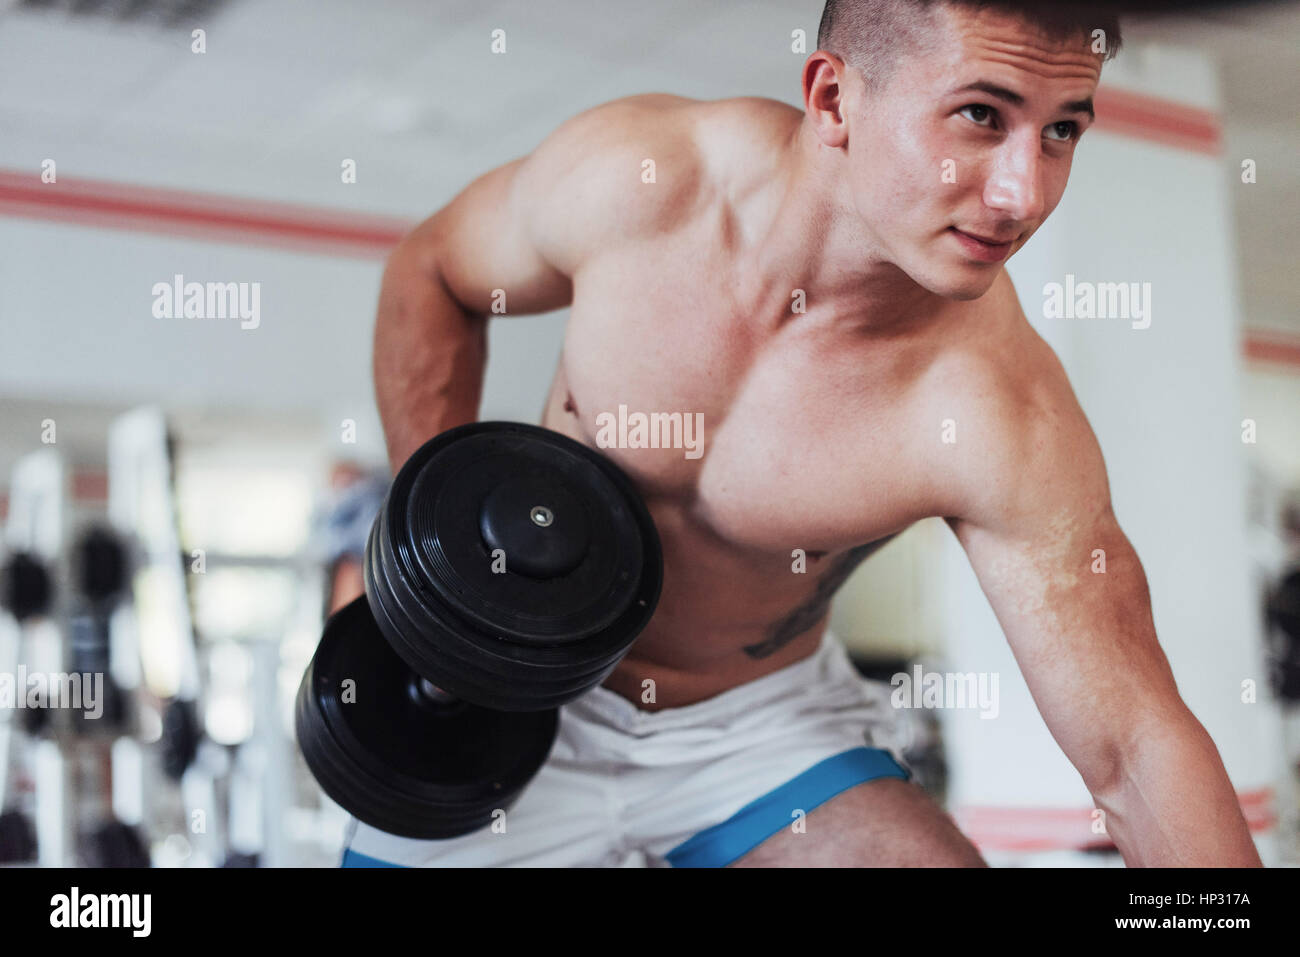 Muscles bodybuilder bodybuilding fitness studio fitness musculation  protection musculaire homme Photo Stock - Alamy, musculation homme 